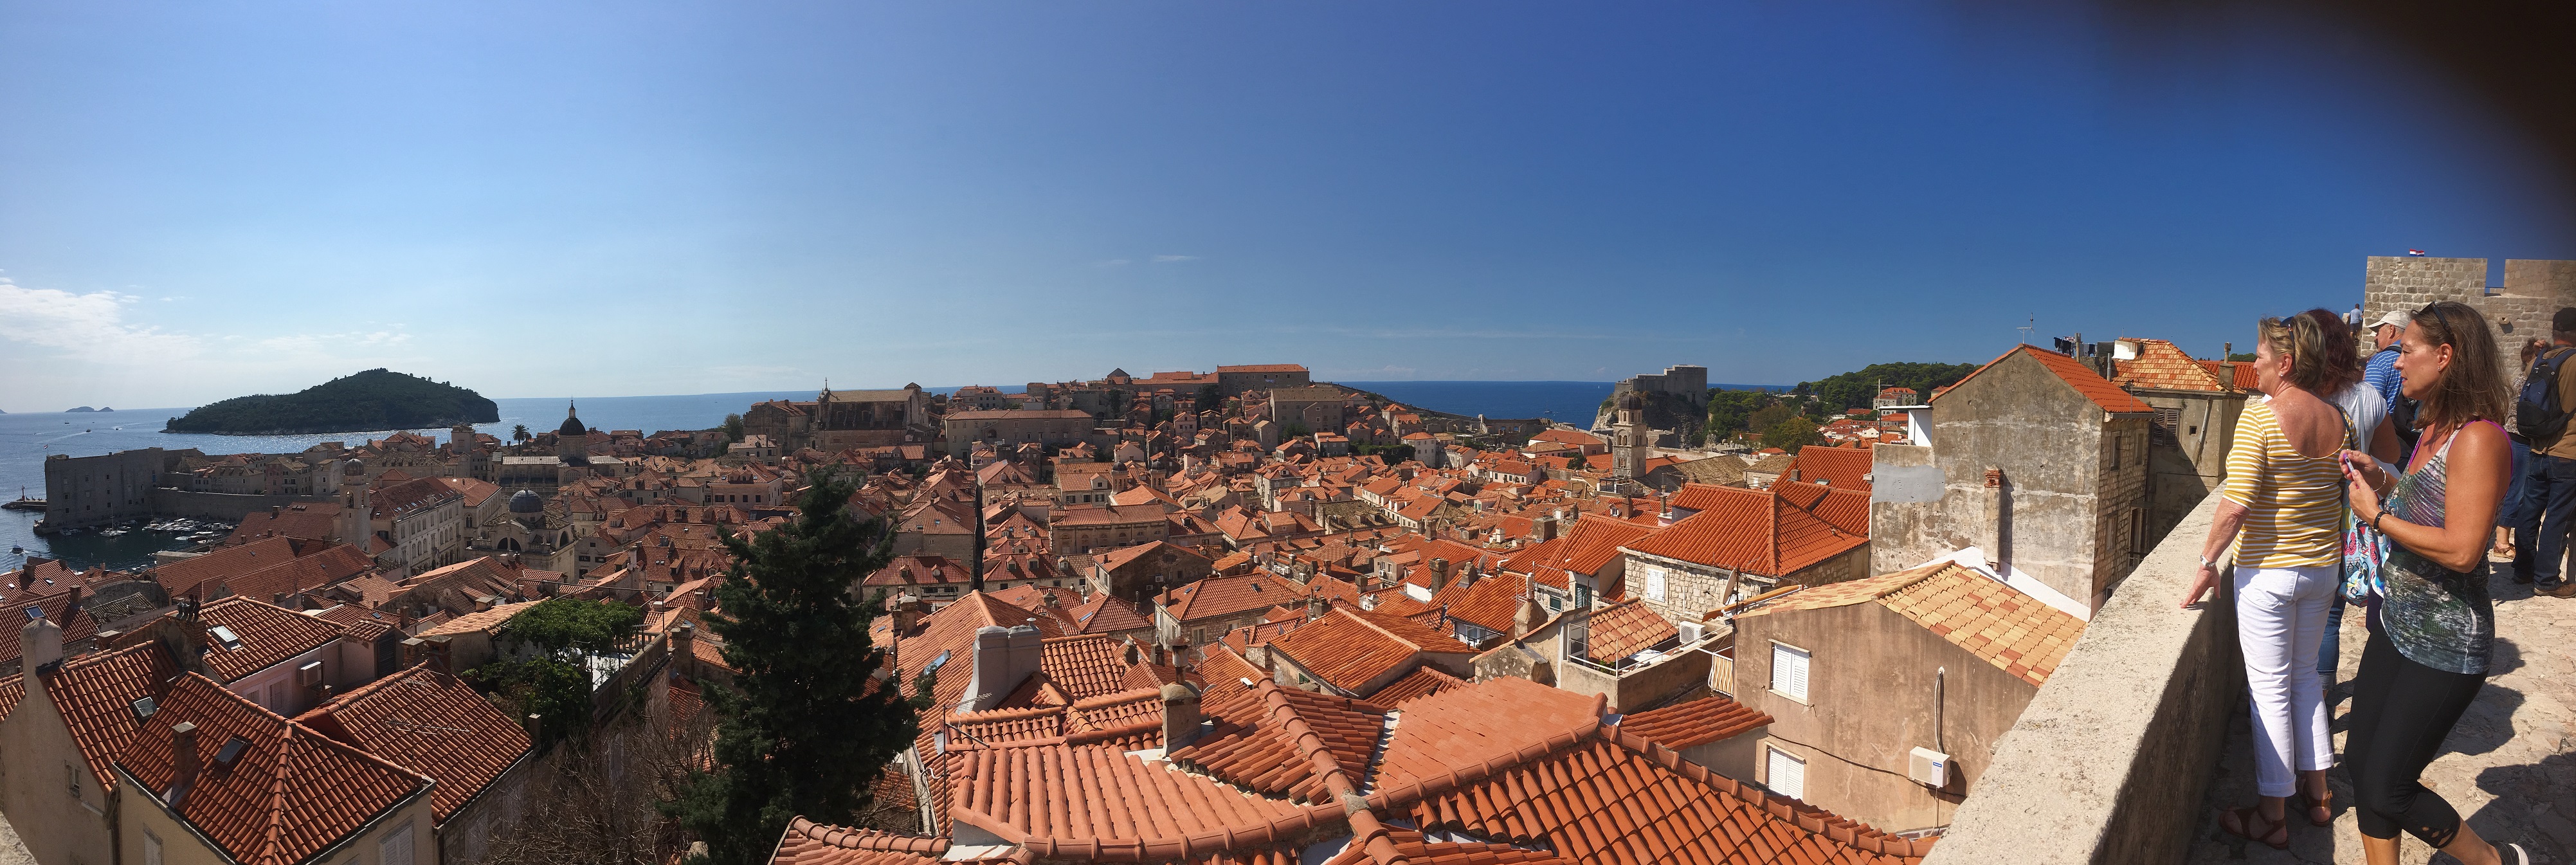 dubrovnik old city view